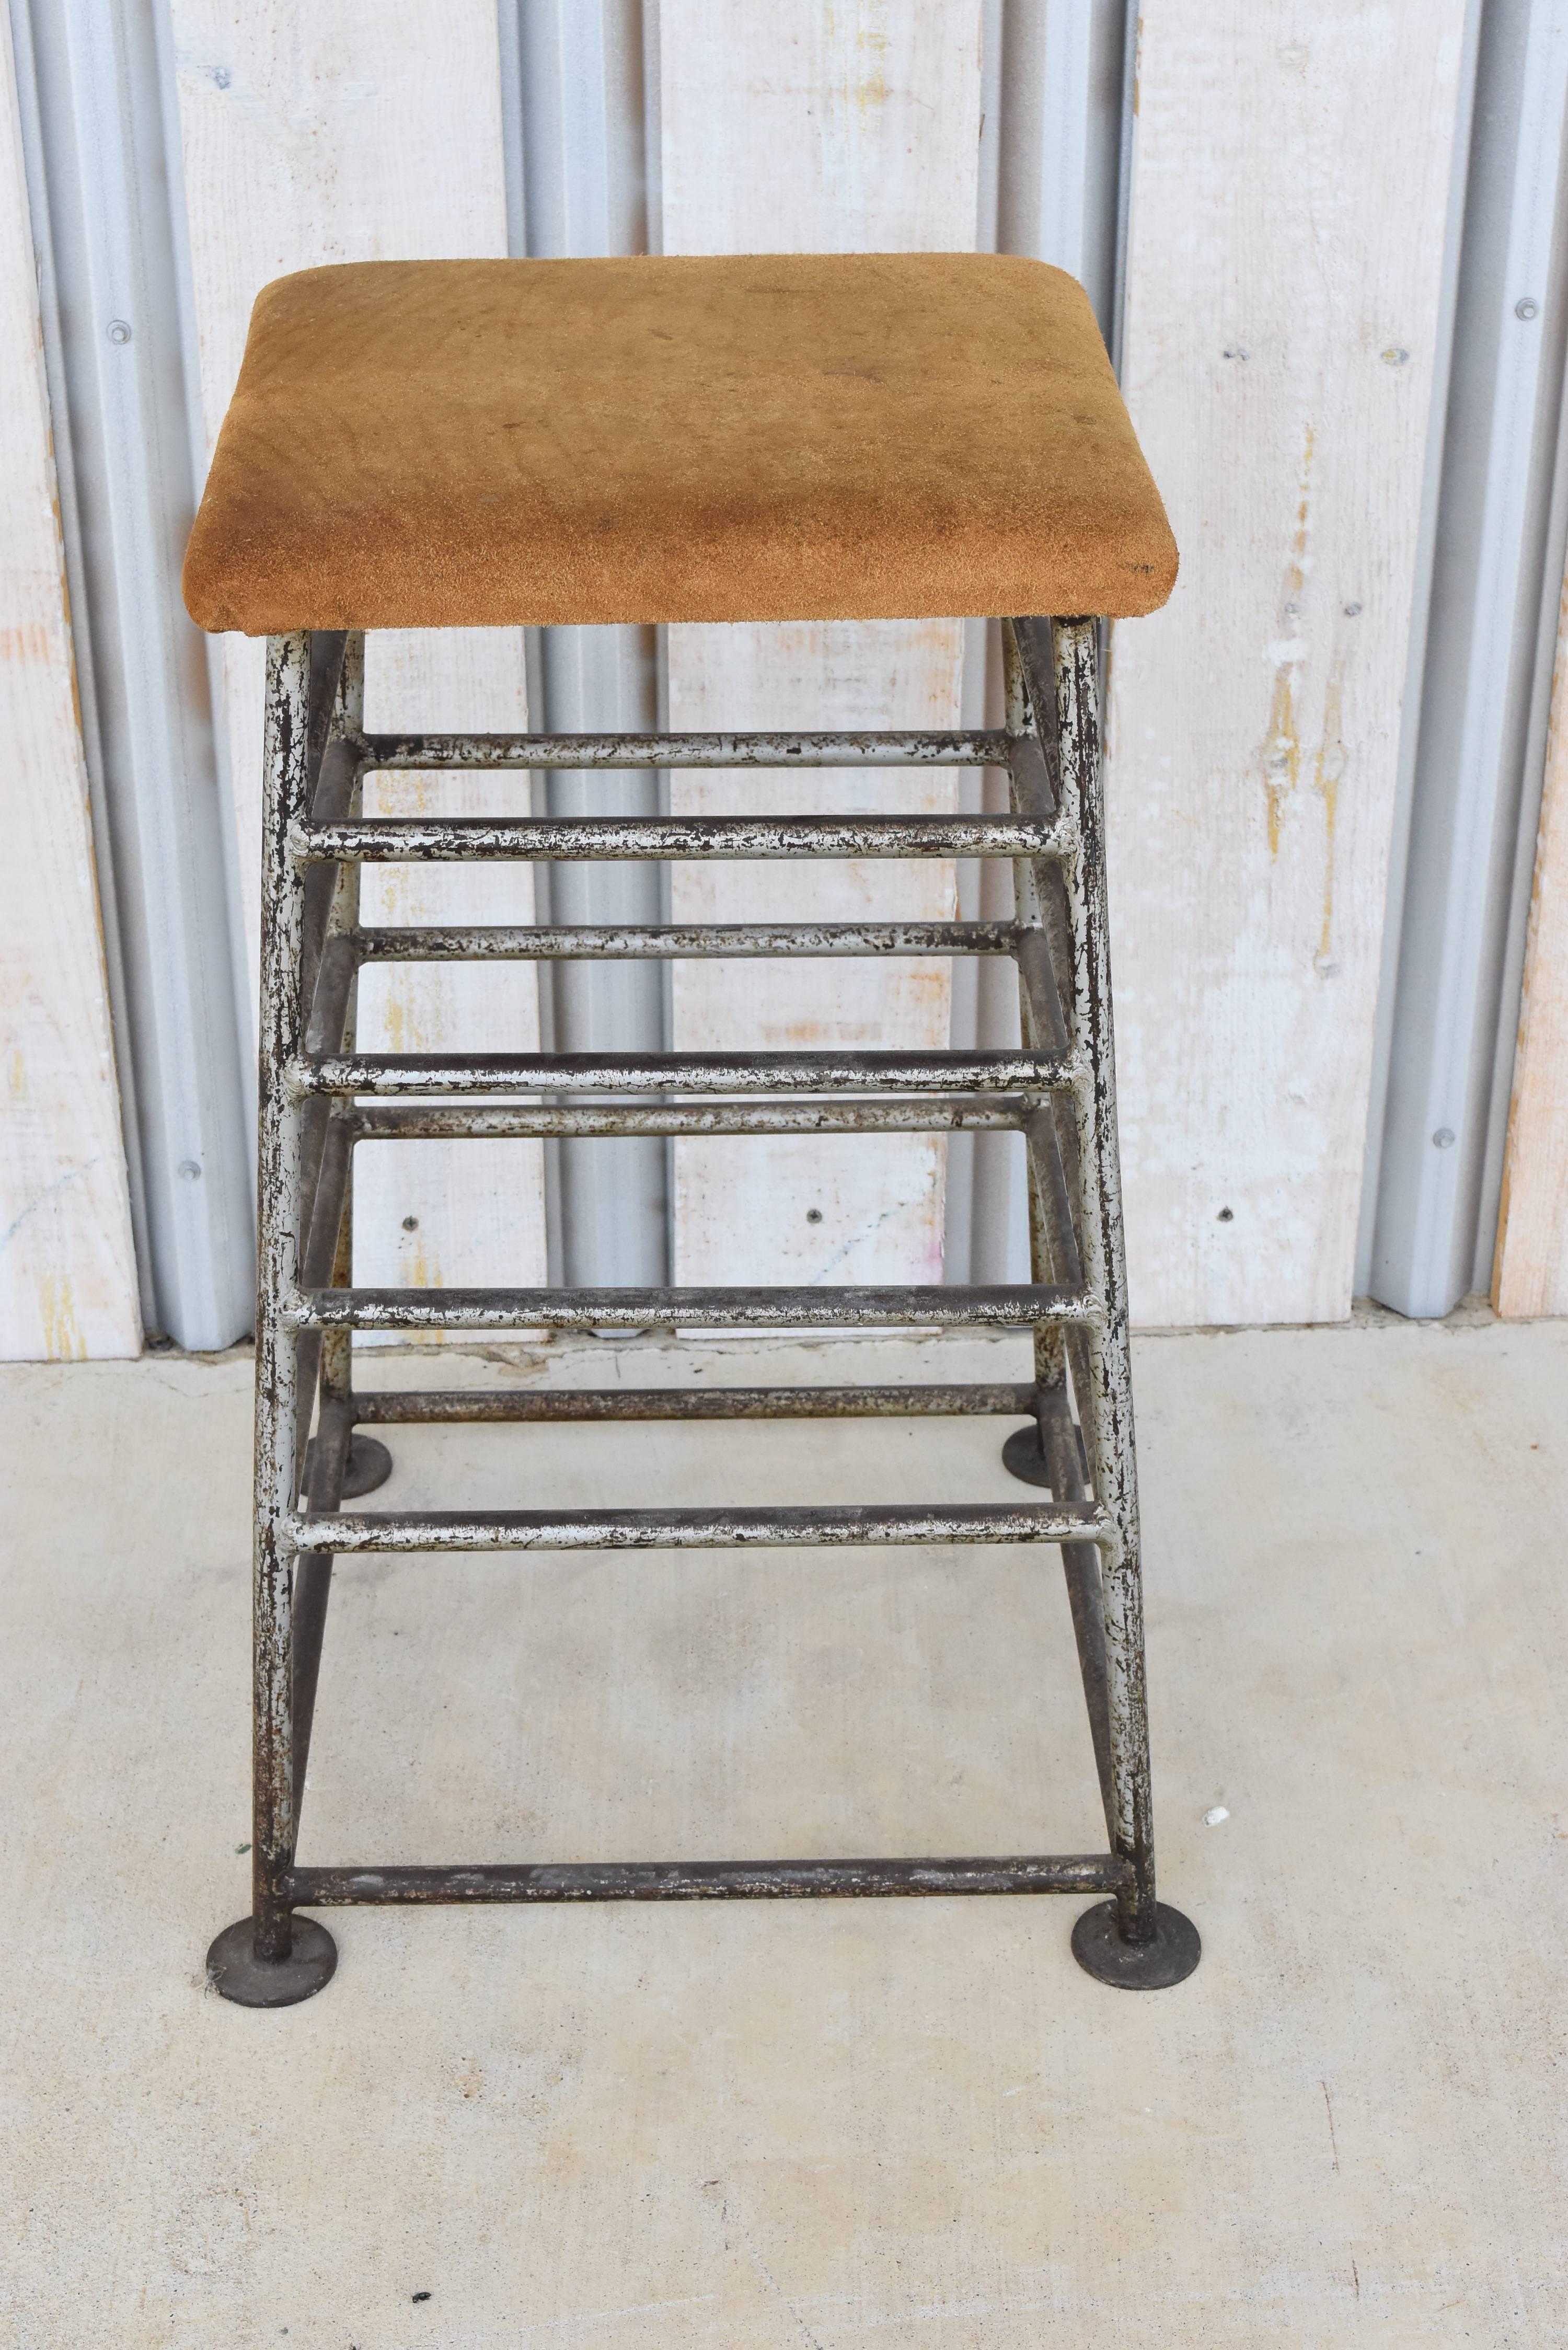 How cool is this. It was formerly used in an old gym and now perfect for a barstool or pedestal for a sculpture.